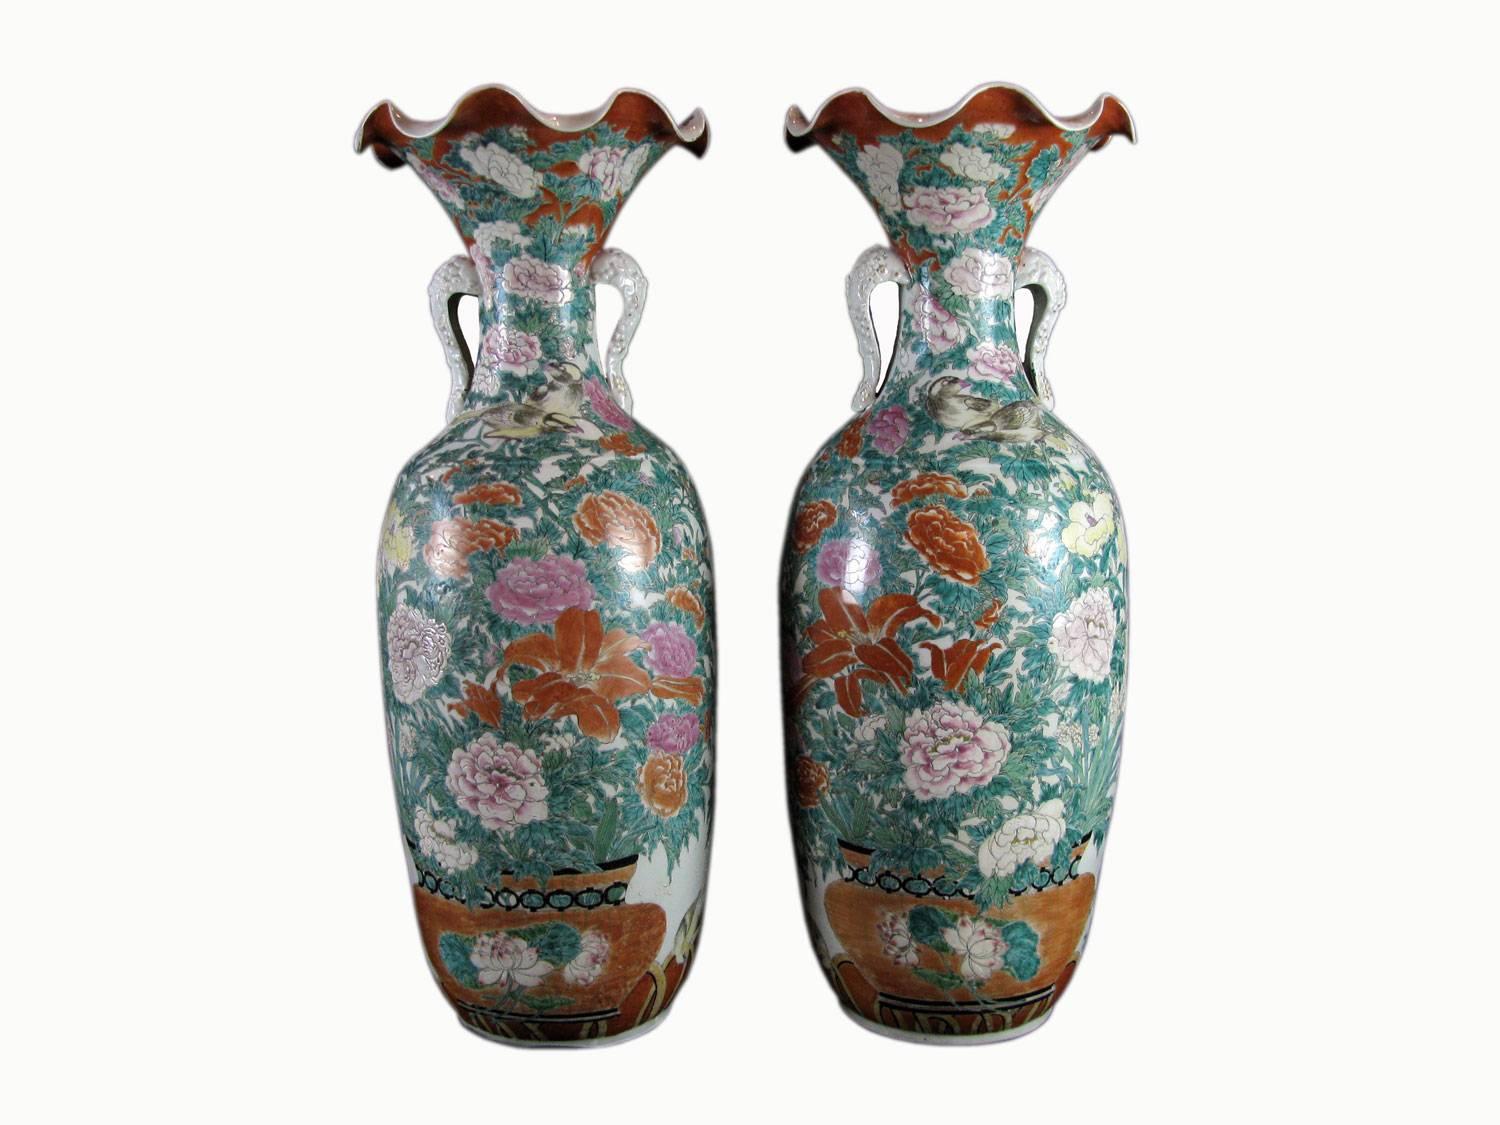 A pair of large antique Kutani style Japanese vases dating back to late 19th century in very good condition.
They are fully hand-painted with vases of polychrome flowers and peony heads and foliage, richly decorated with vegetal elements and